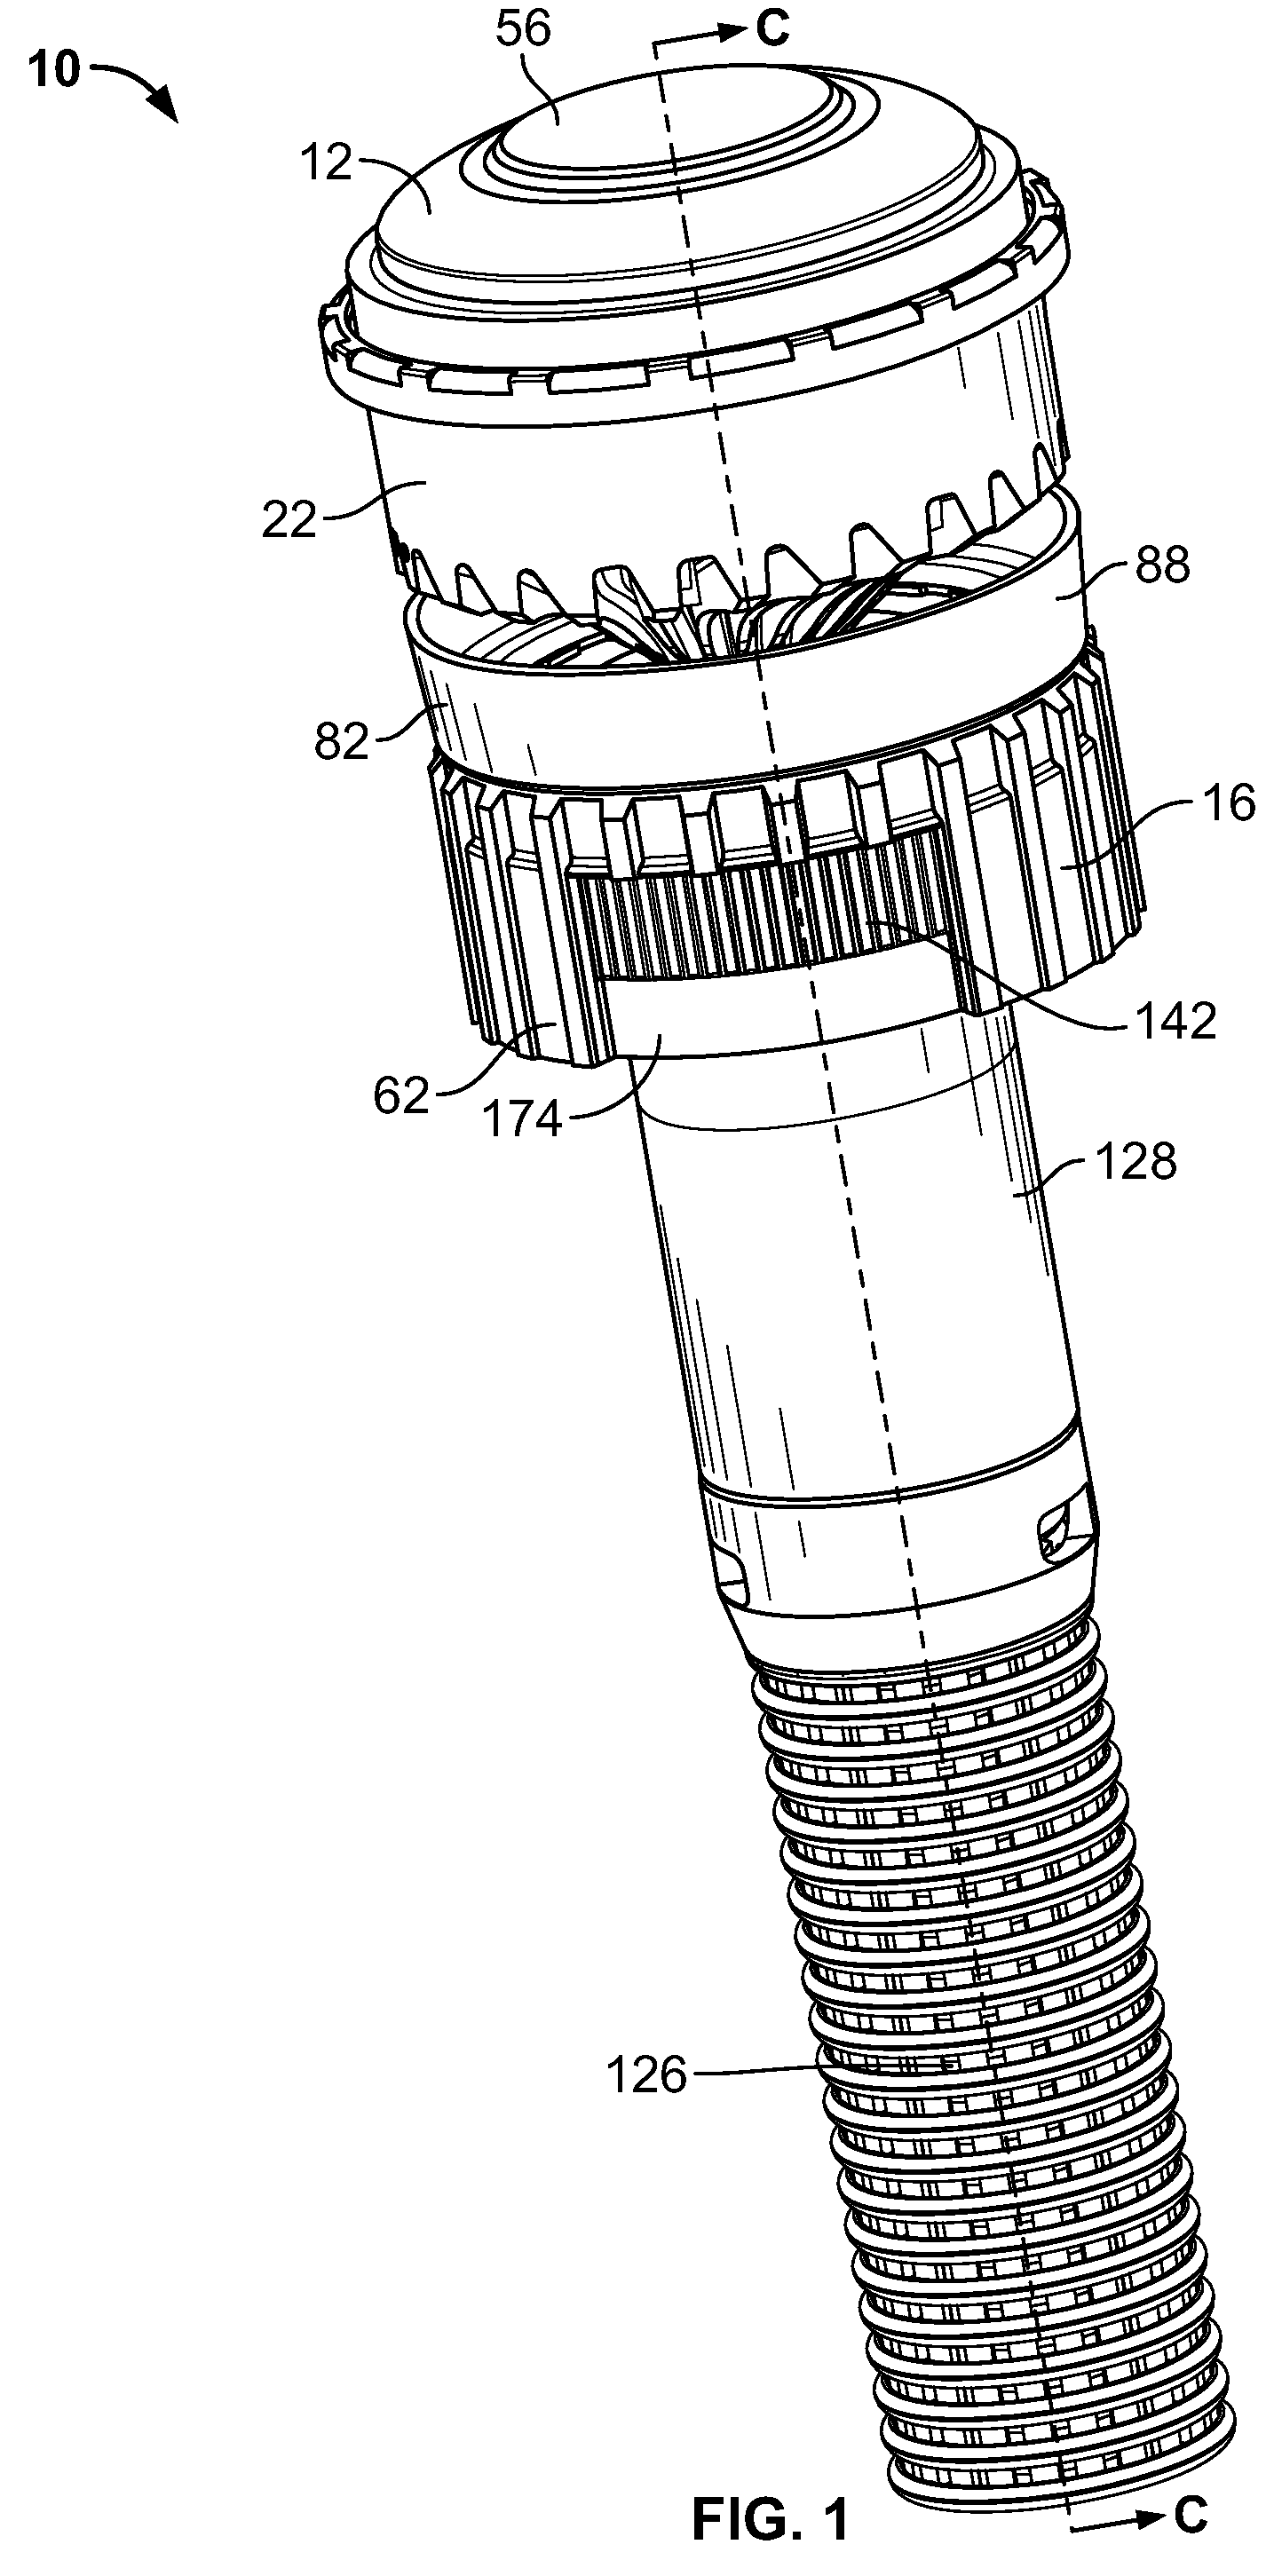 Sprinkler with variable arc and flow rate